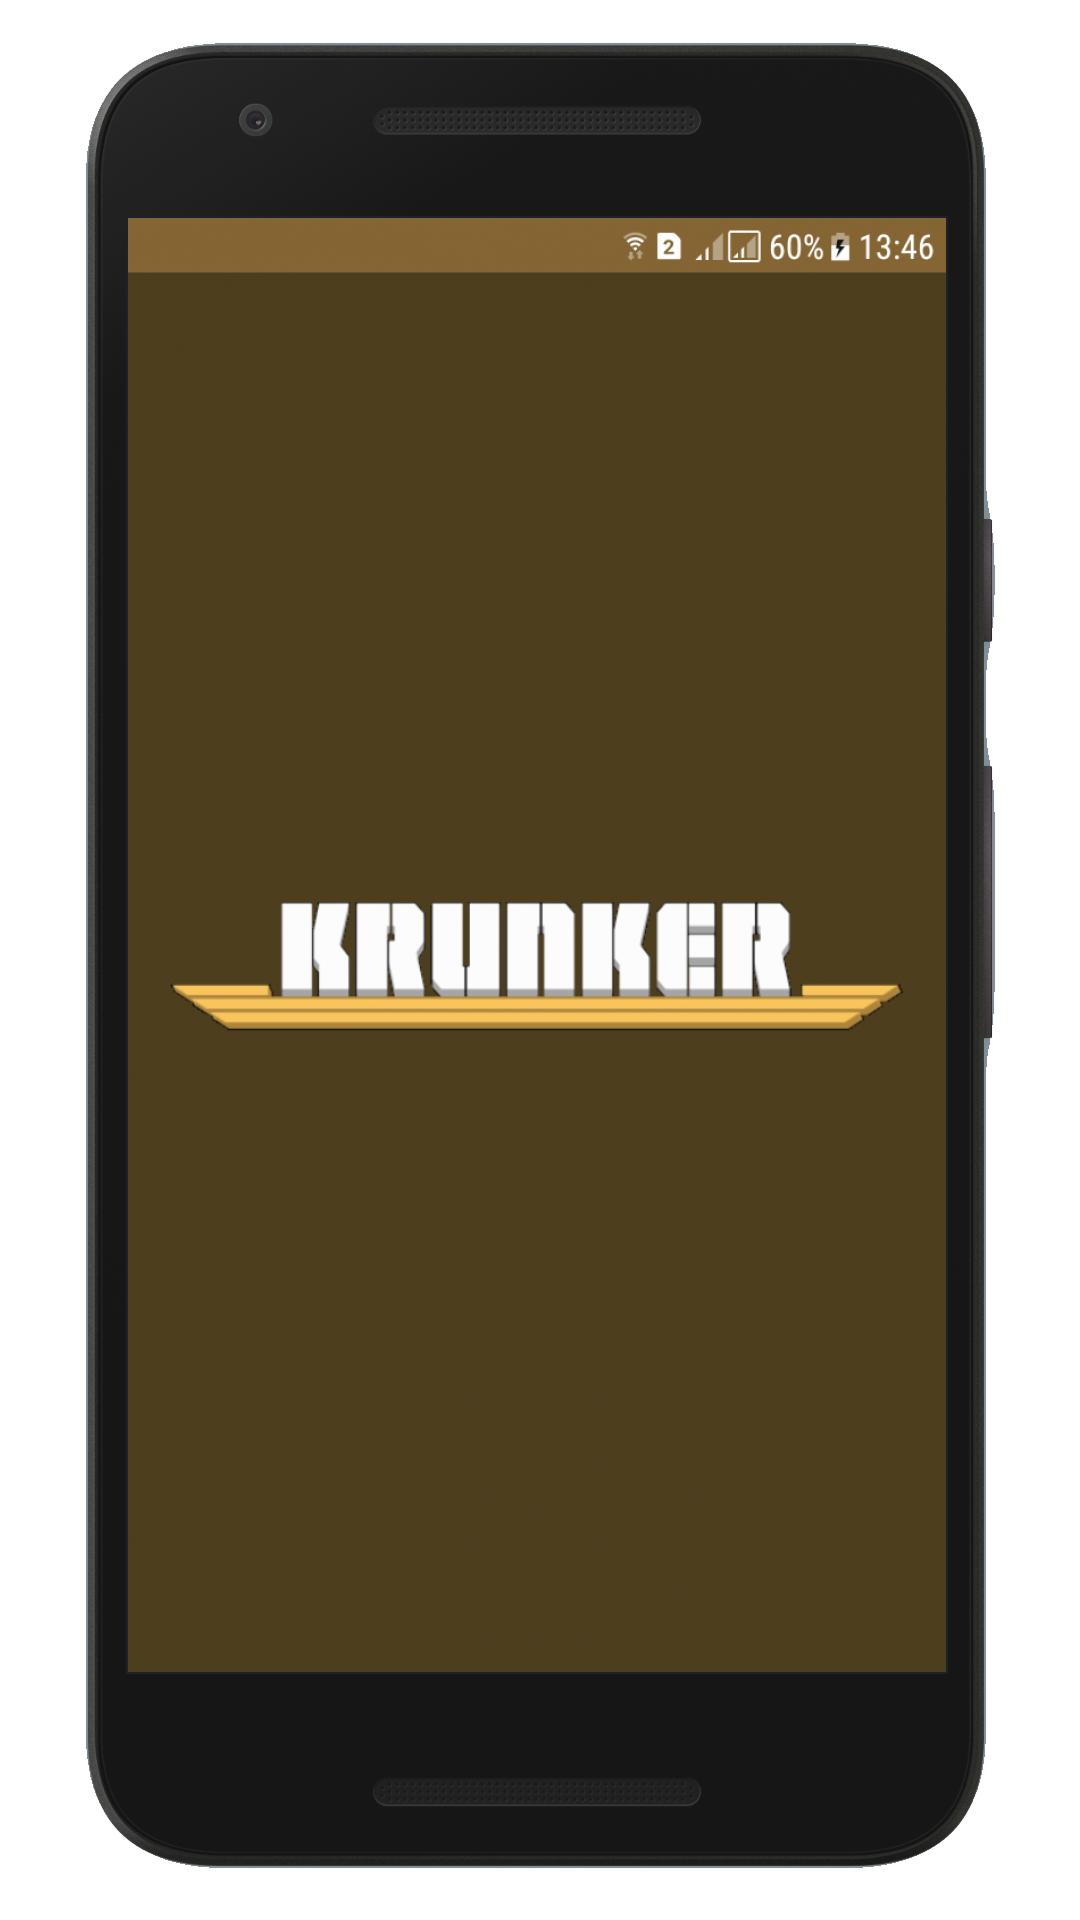 krunker.io for Android - APK Download